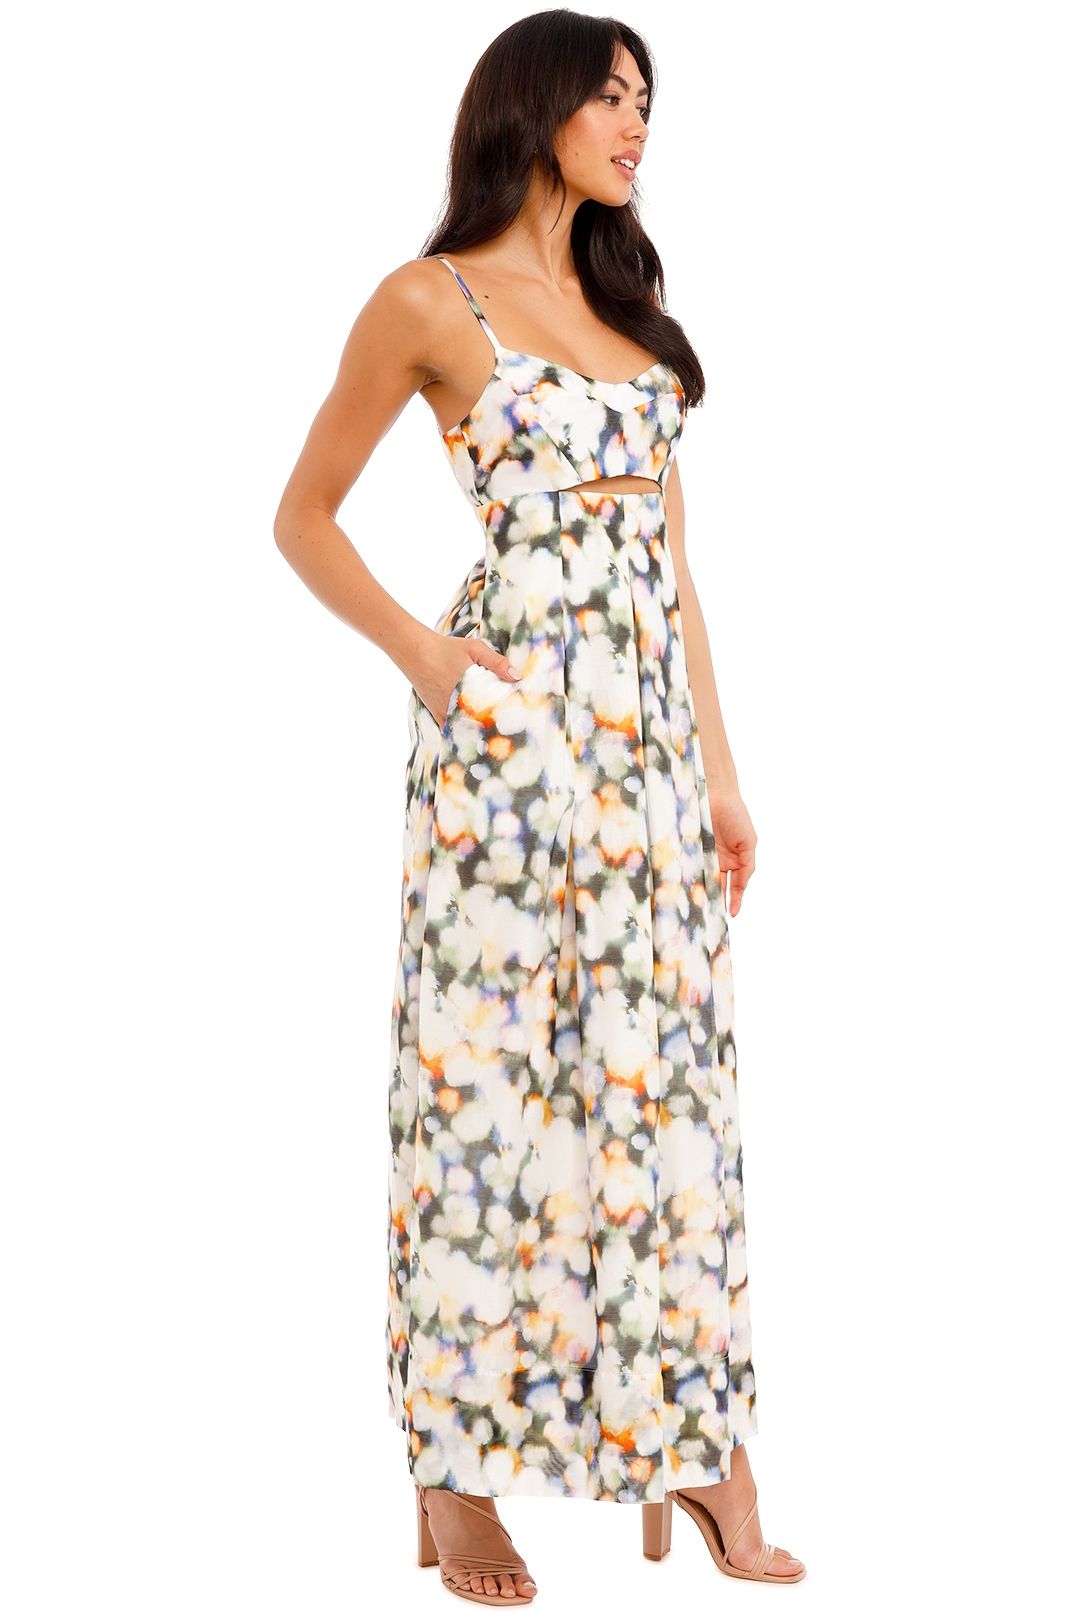 Lumiere Sundress in Lumiere Ginger and Smart sweetheart